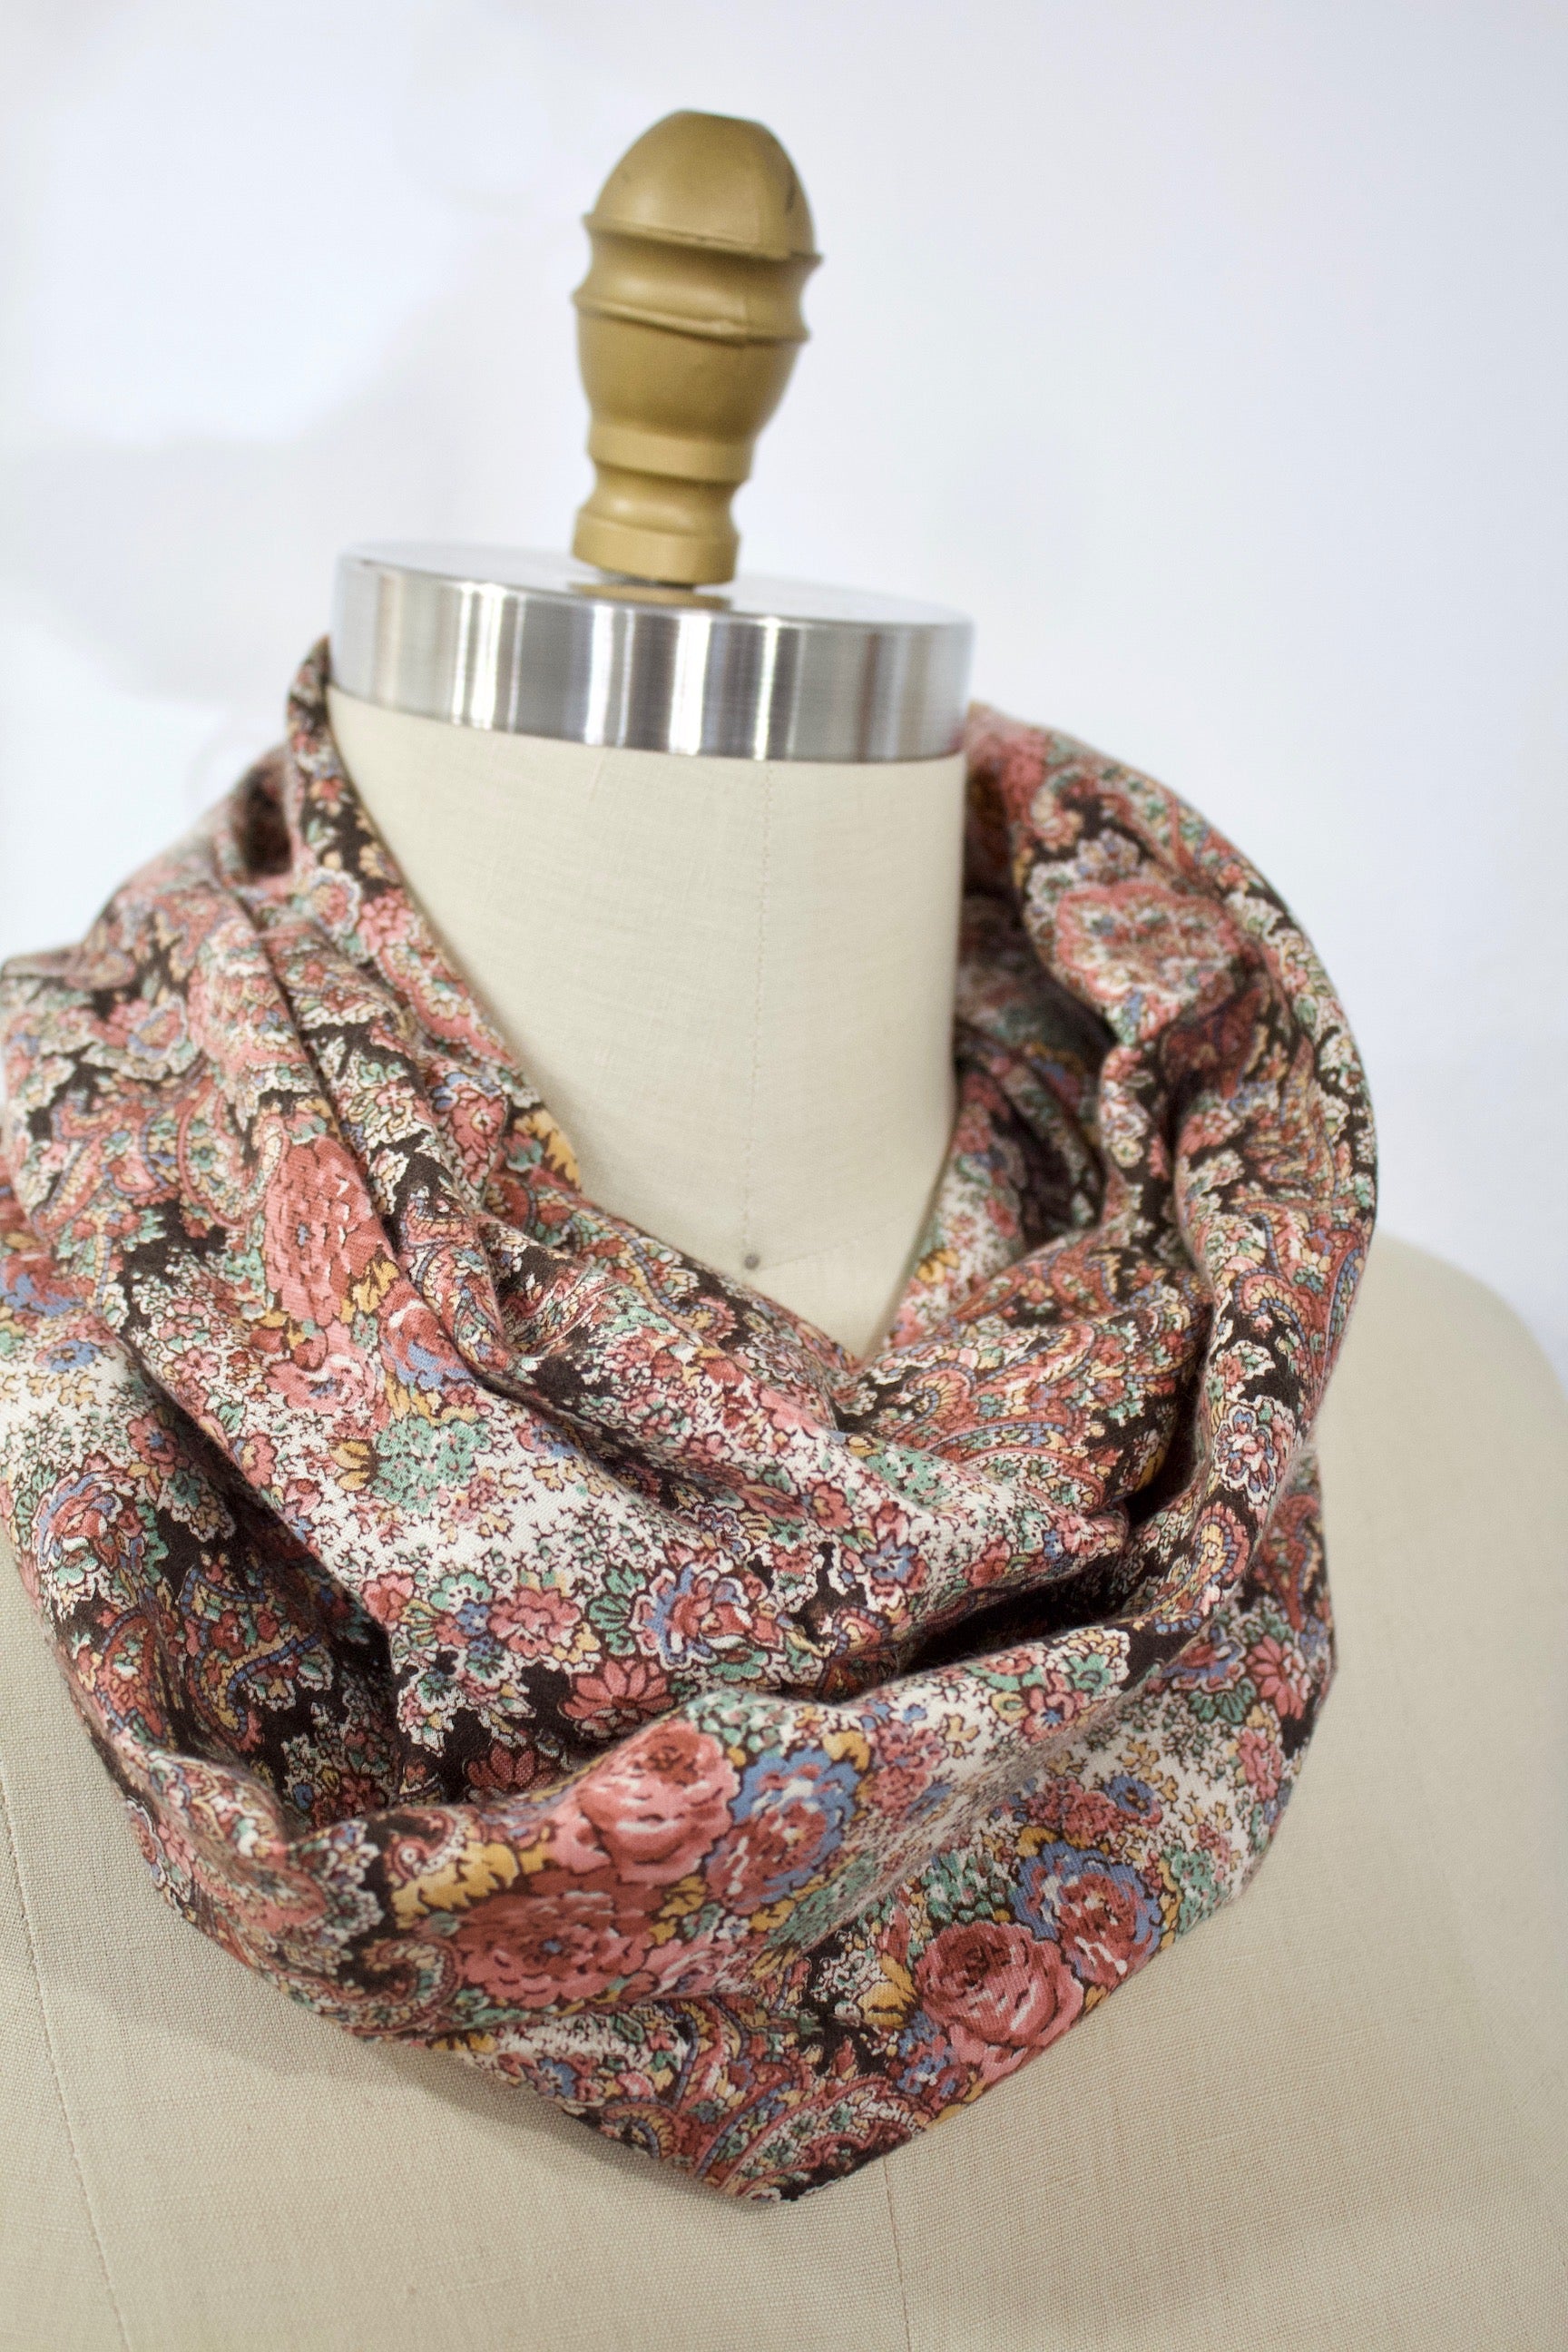 Rose Marie Infinity Scarf-The Blue Peony-Category_Infinity Scarf,Color_Brown,Color_Cream,Color_Pink,Department_Personal Accessory,Material_Cotton,Pattern_Floral,Pattern_Paisley